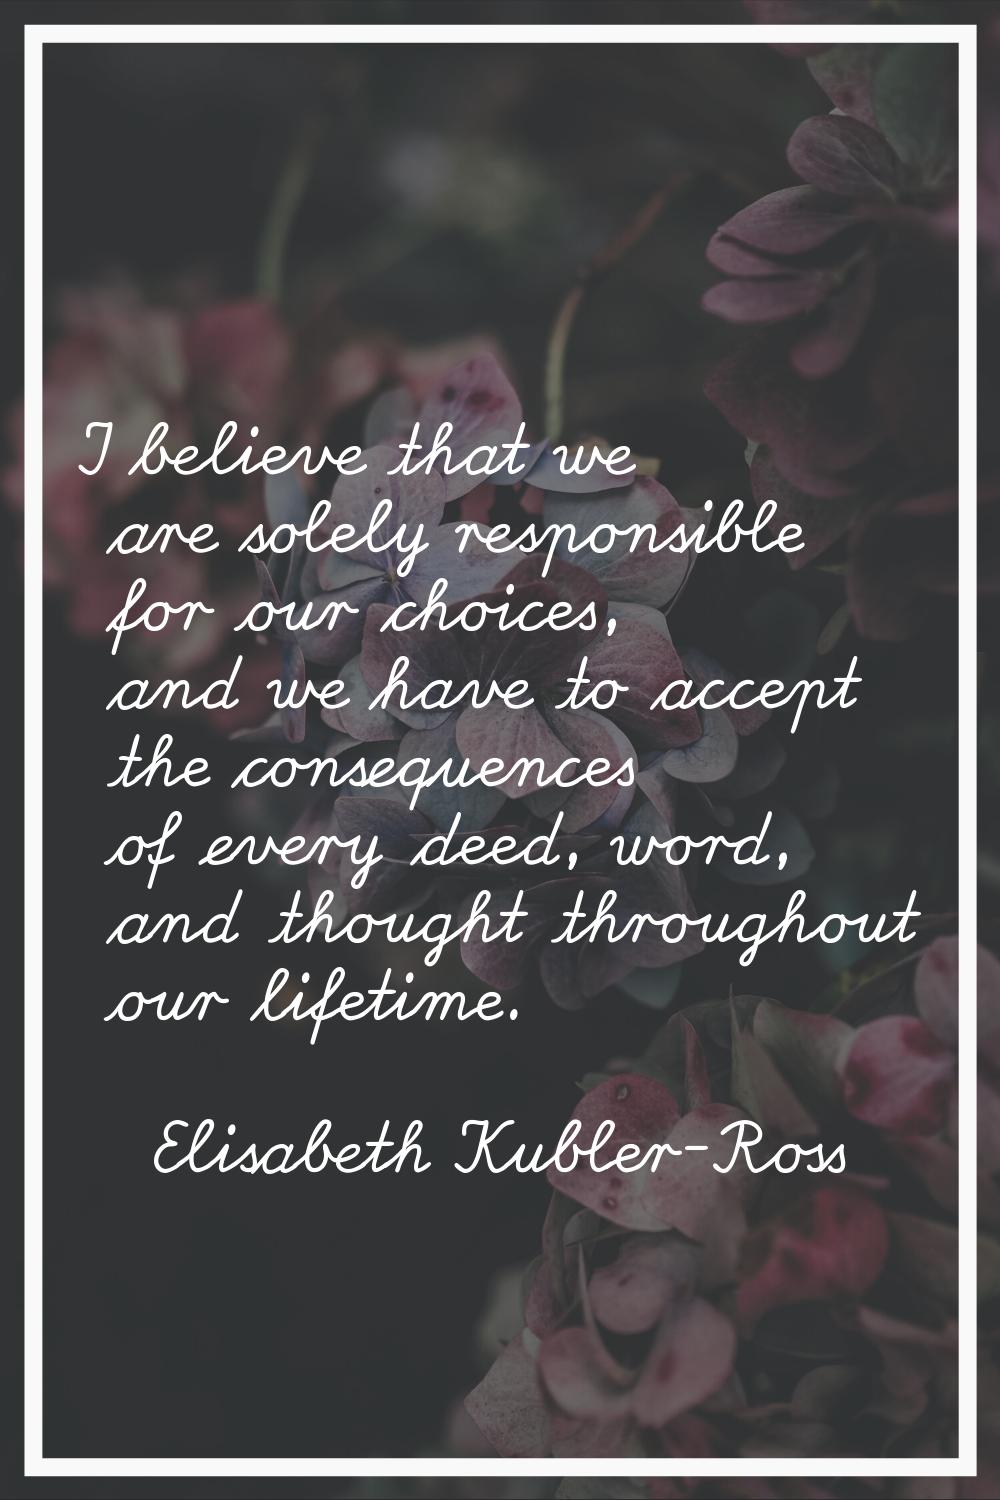 I believe that we are solely responsible for our choices, and we have to accept the consequences of